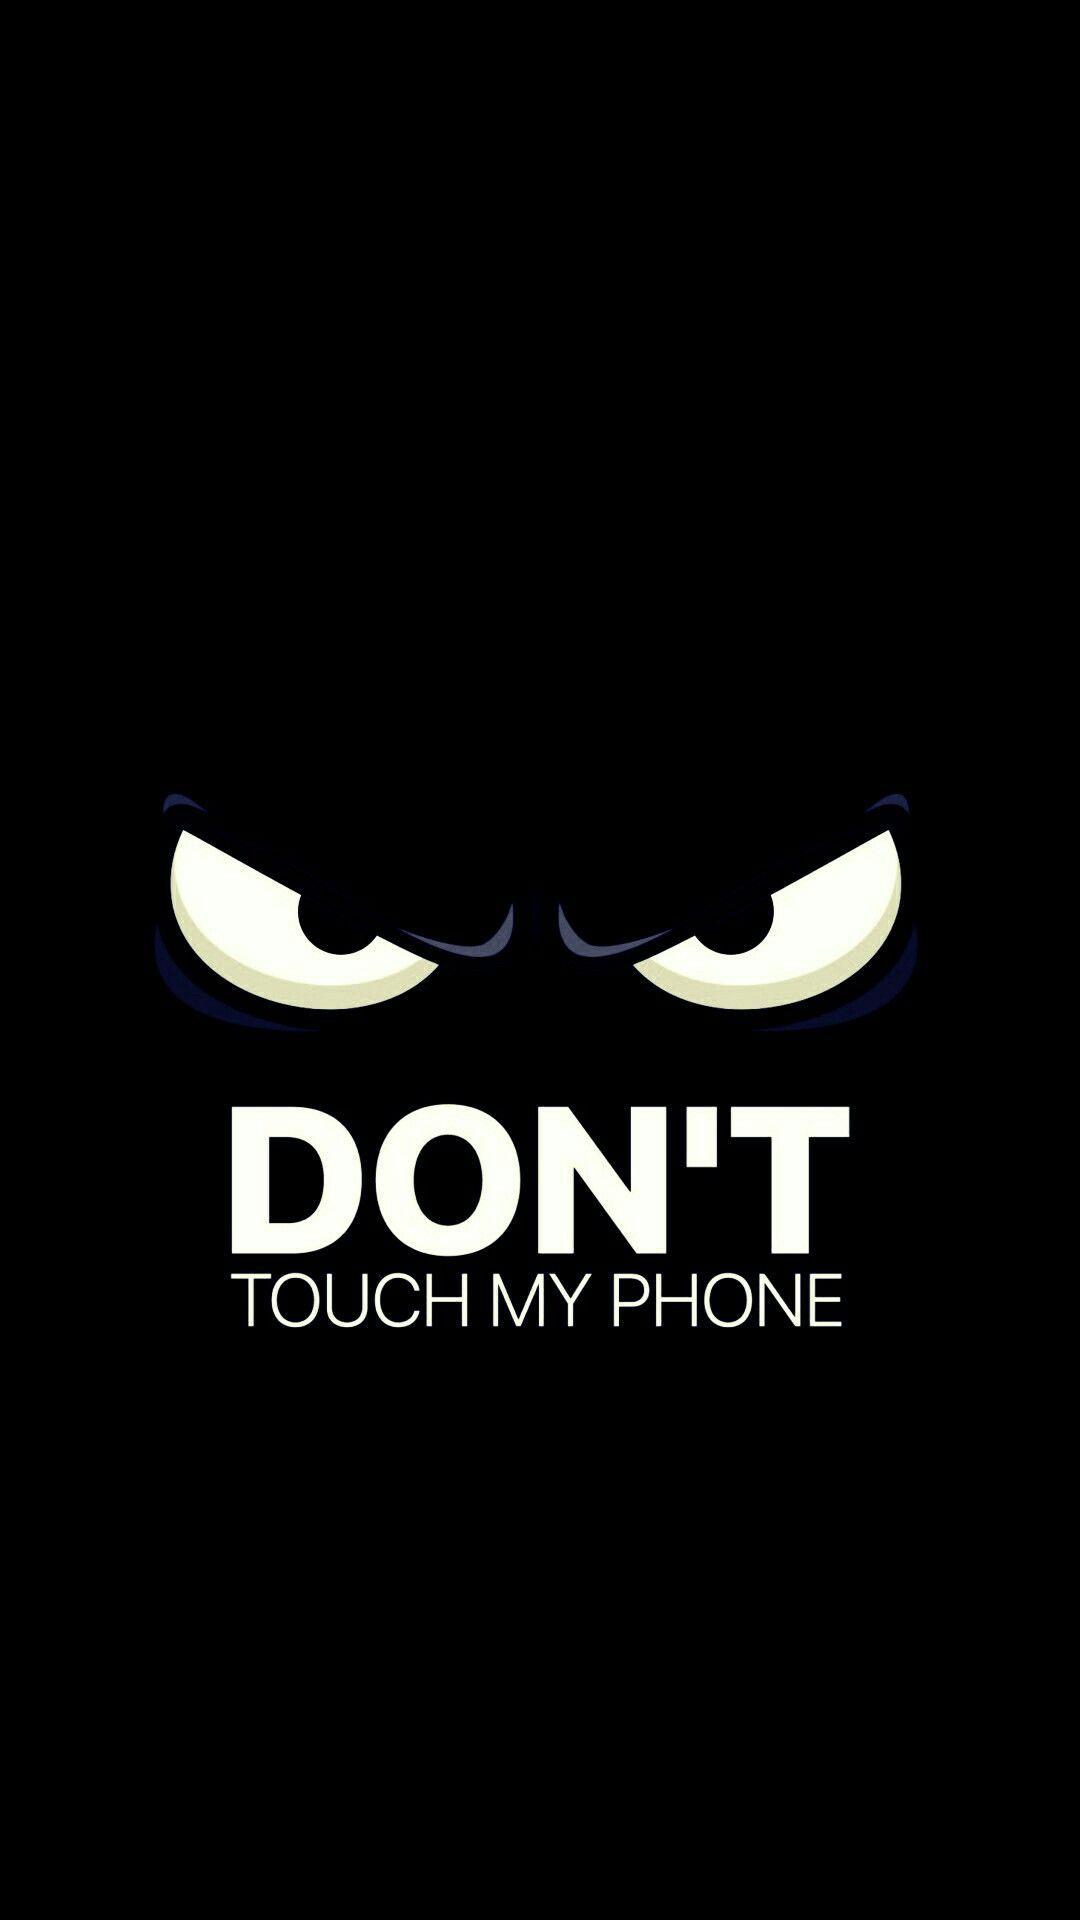 Don't Touch My Phone. Wallpaper. Phone, Wallpaper